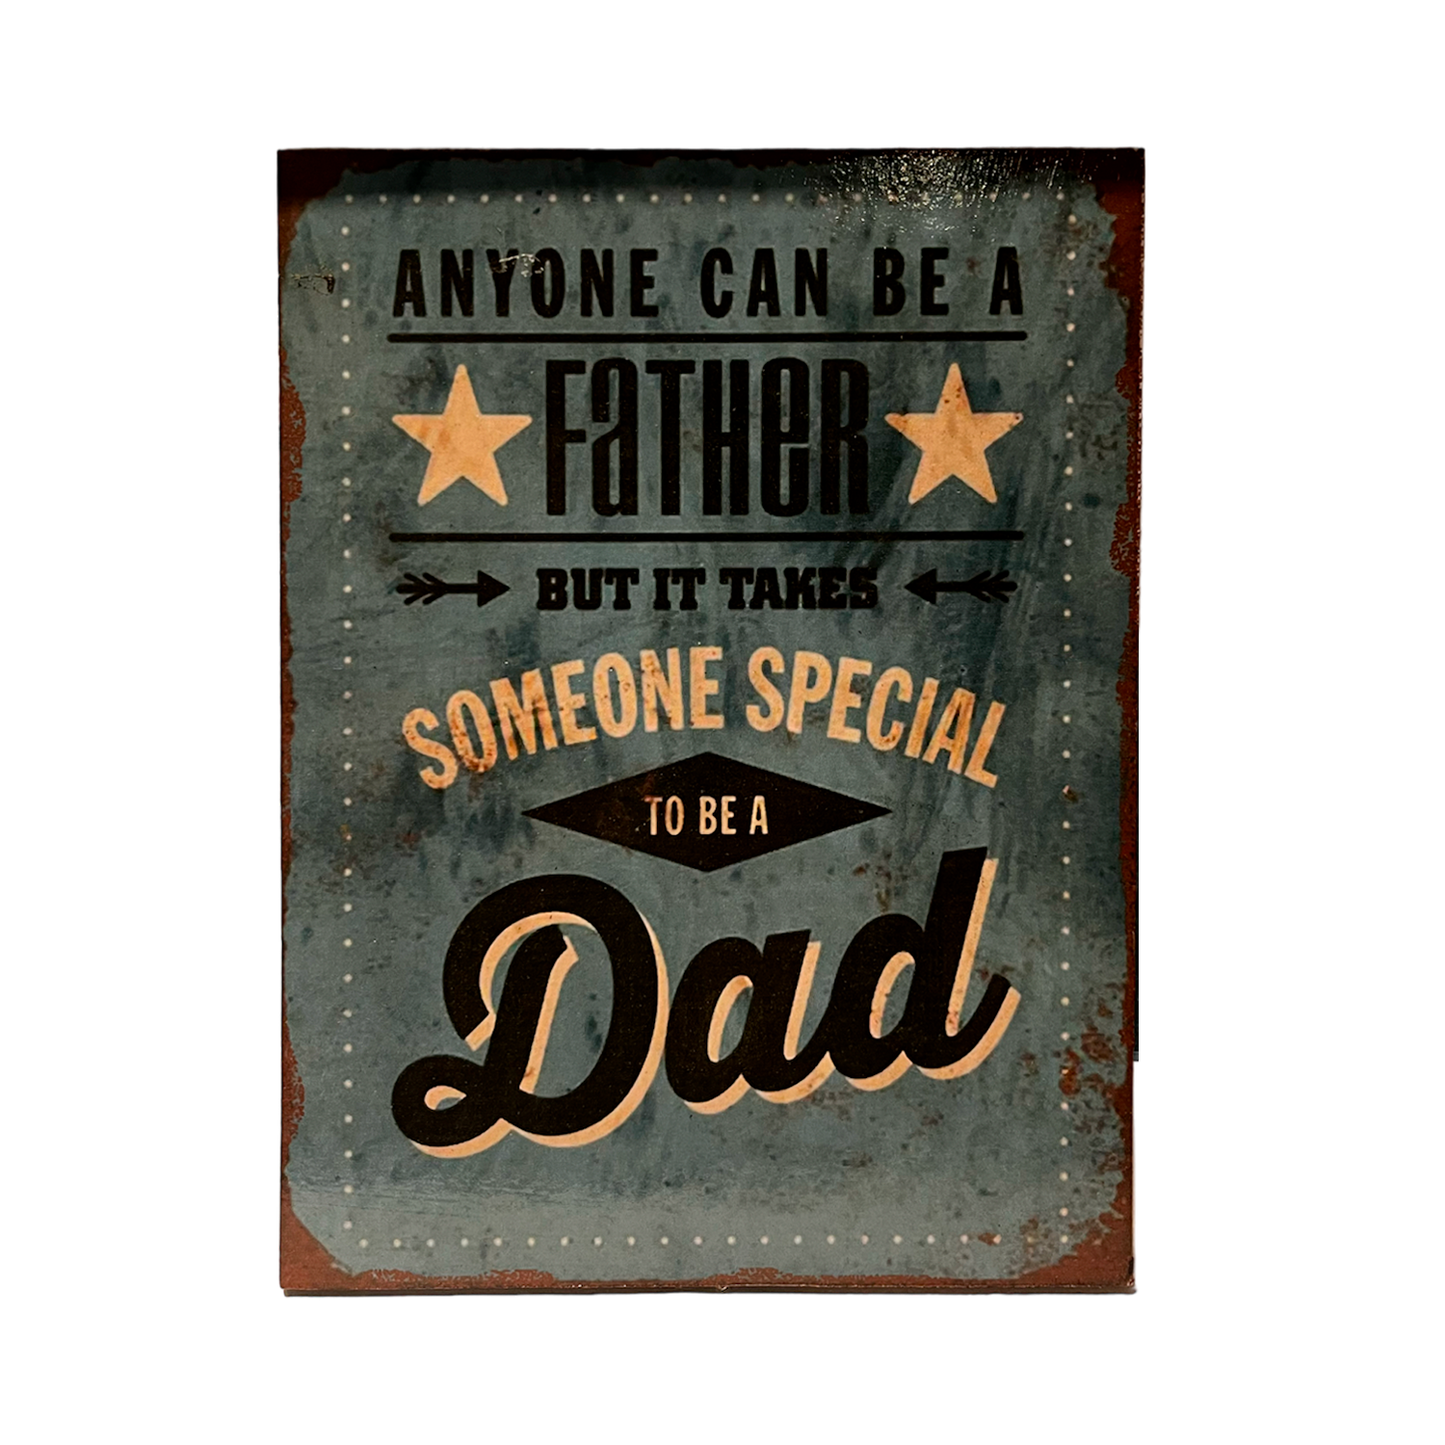 Afiche "Anyone can be a father"